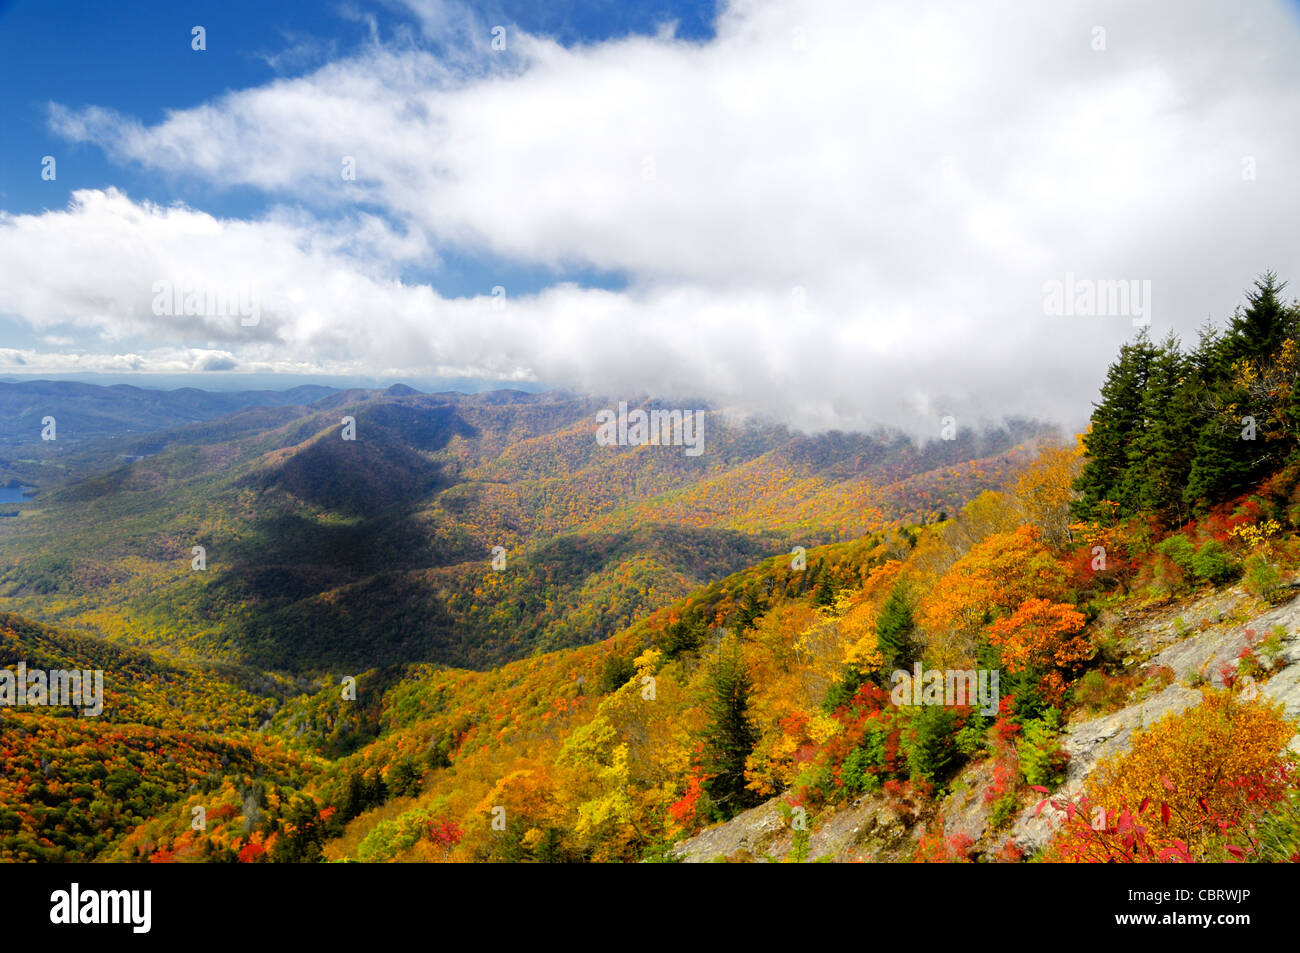 A sweeping peak autumn color view on the Blue Ridge Parkway, North Carolina, USA. Picture by Darrell Young. Stock Photo